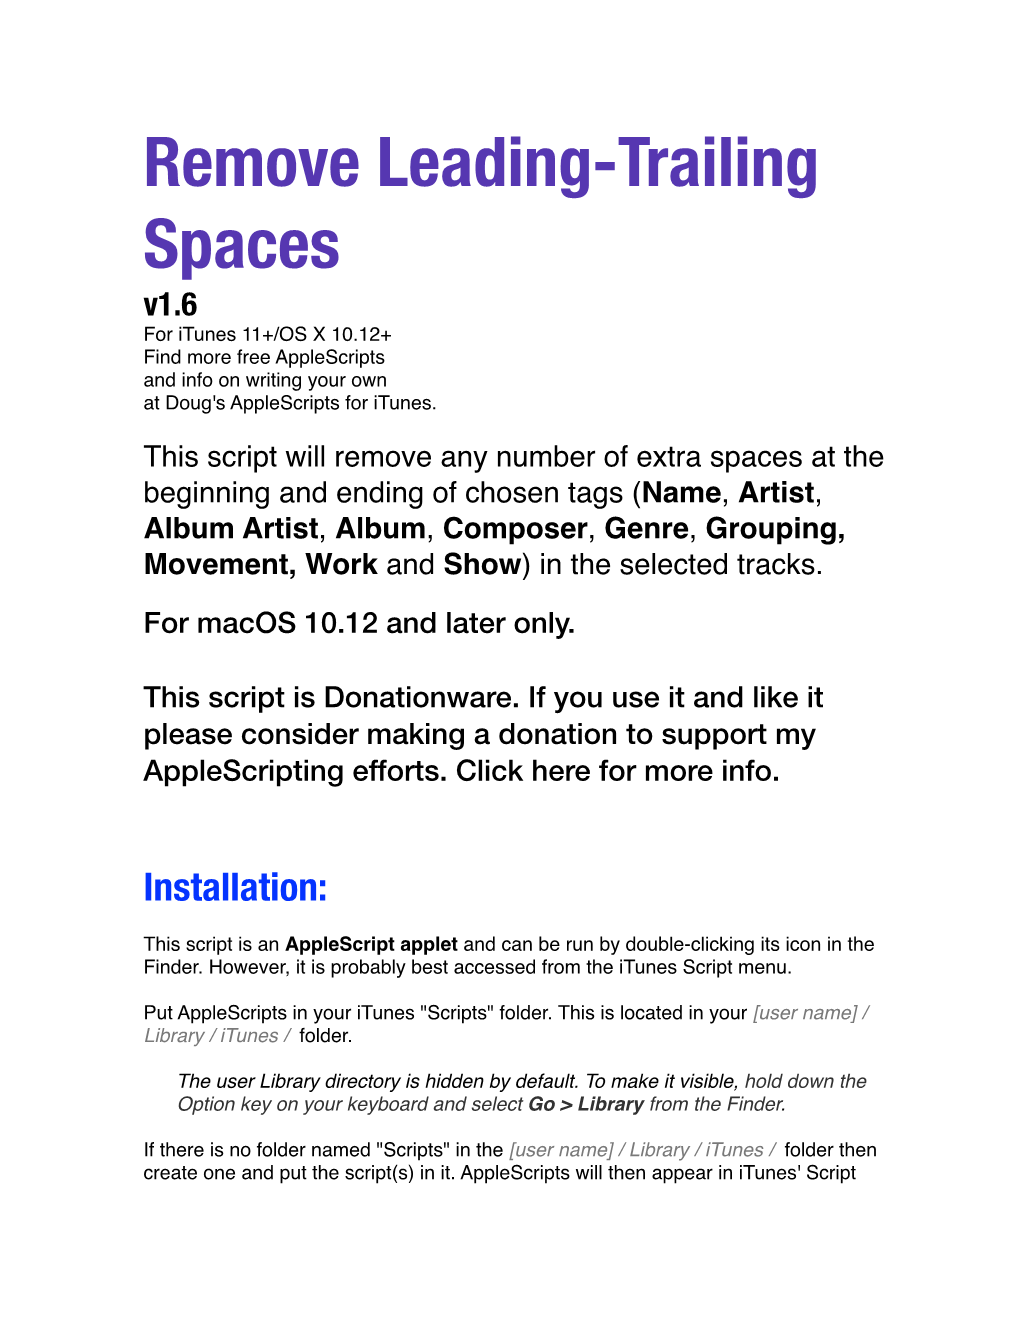 Remove Leading-Trailing Spaces V1.6 for Itunes 11+/OS X 10.12+ Find More Free Applescripts and Info on Writing Your Own at Doug's Applescripts for Itunes